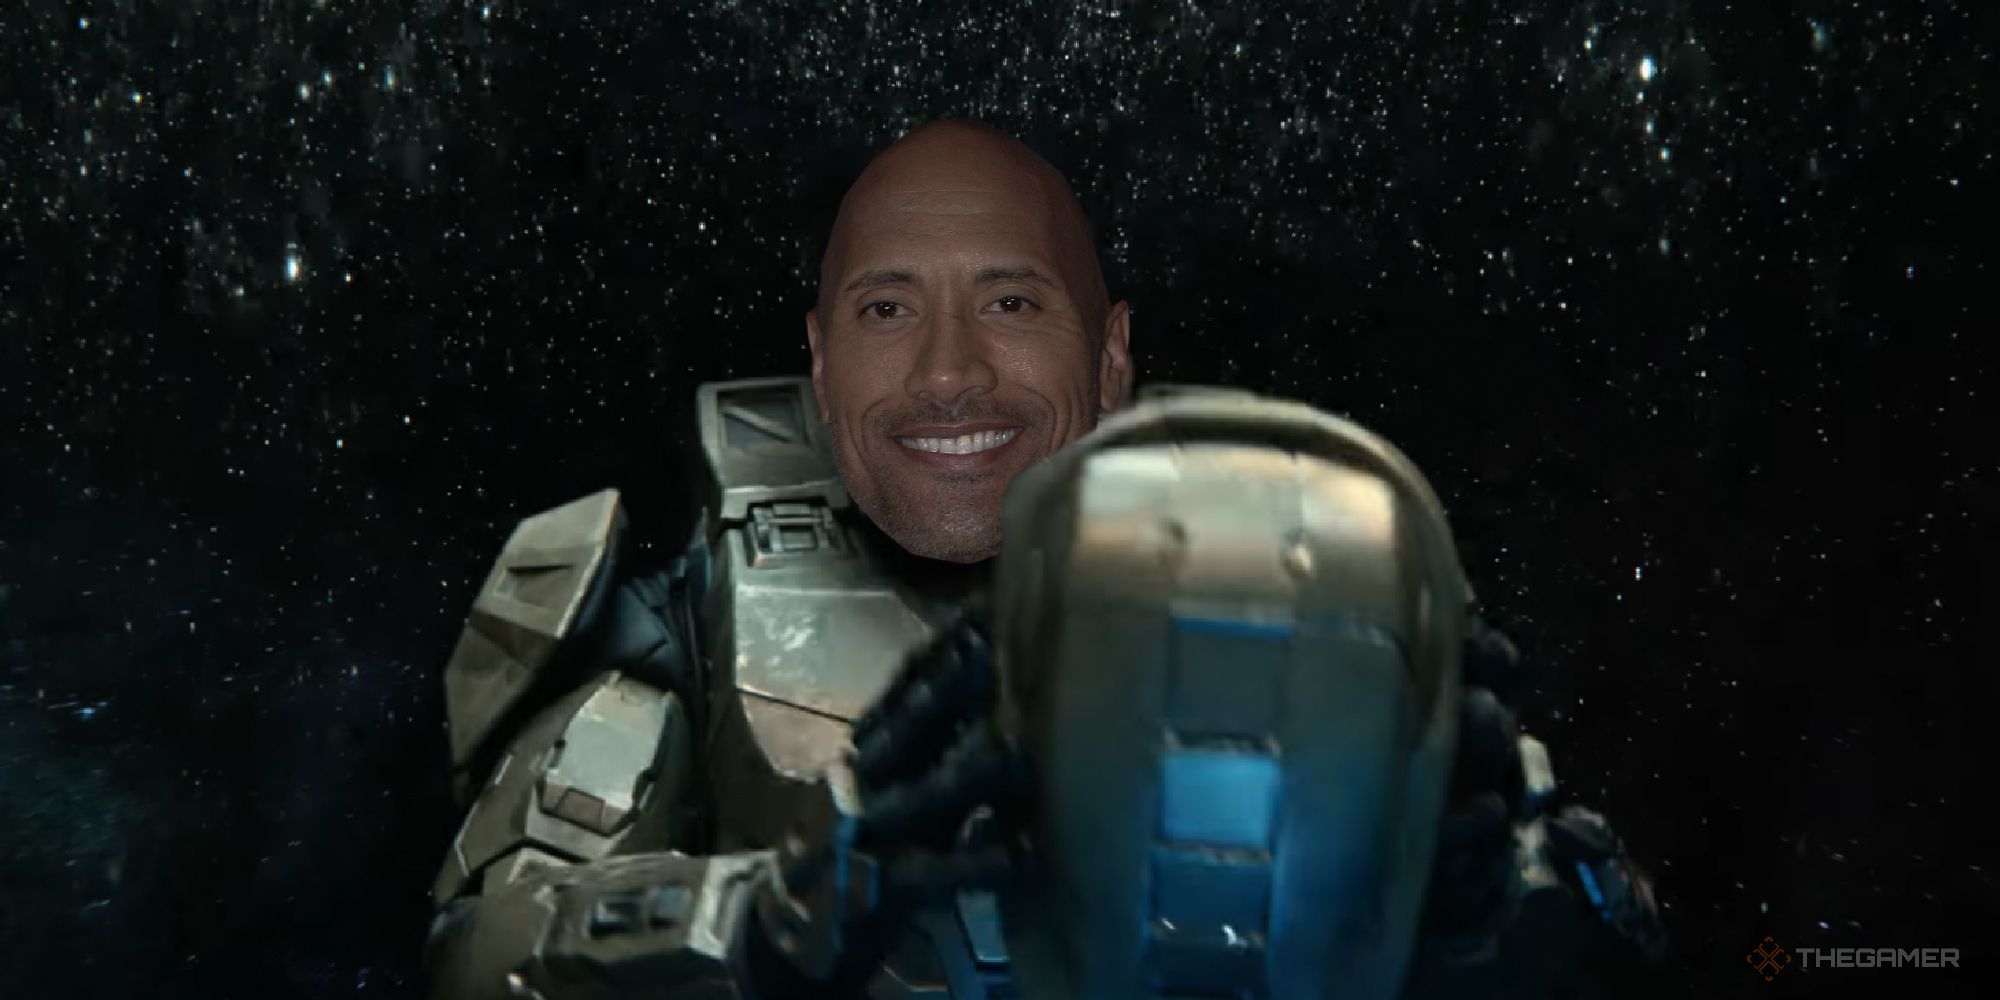 Master Chief To Have Face Revealed In Paramount Plus Live-Action Halo Series  - Bounding Into Comics